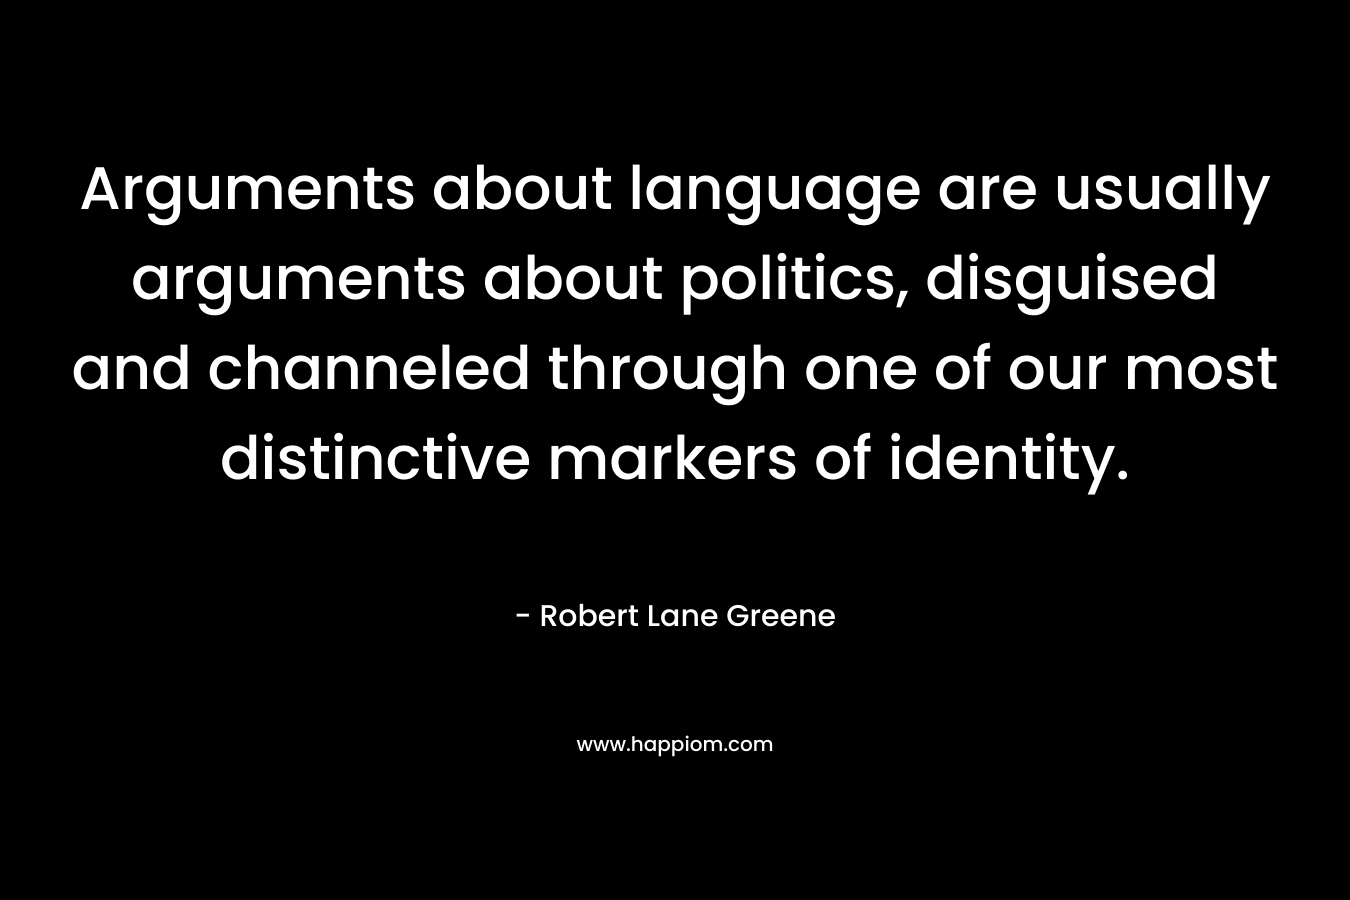 Arguments about language are usually arguments about politics, disguised and channeled through one of our most distinctive markers of identity.